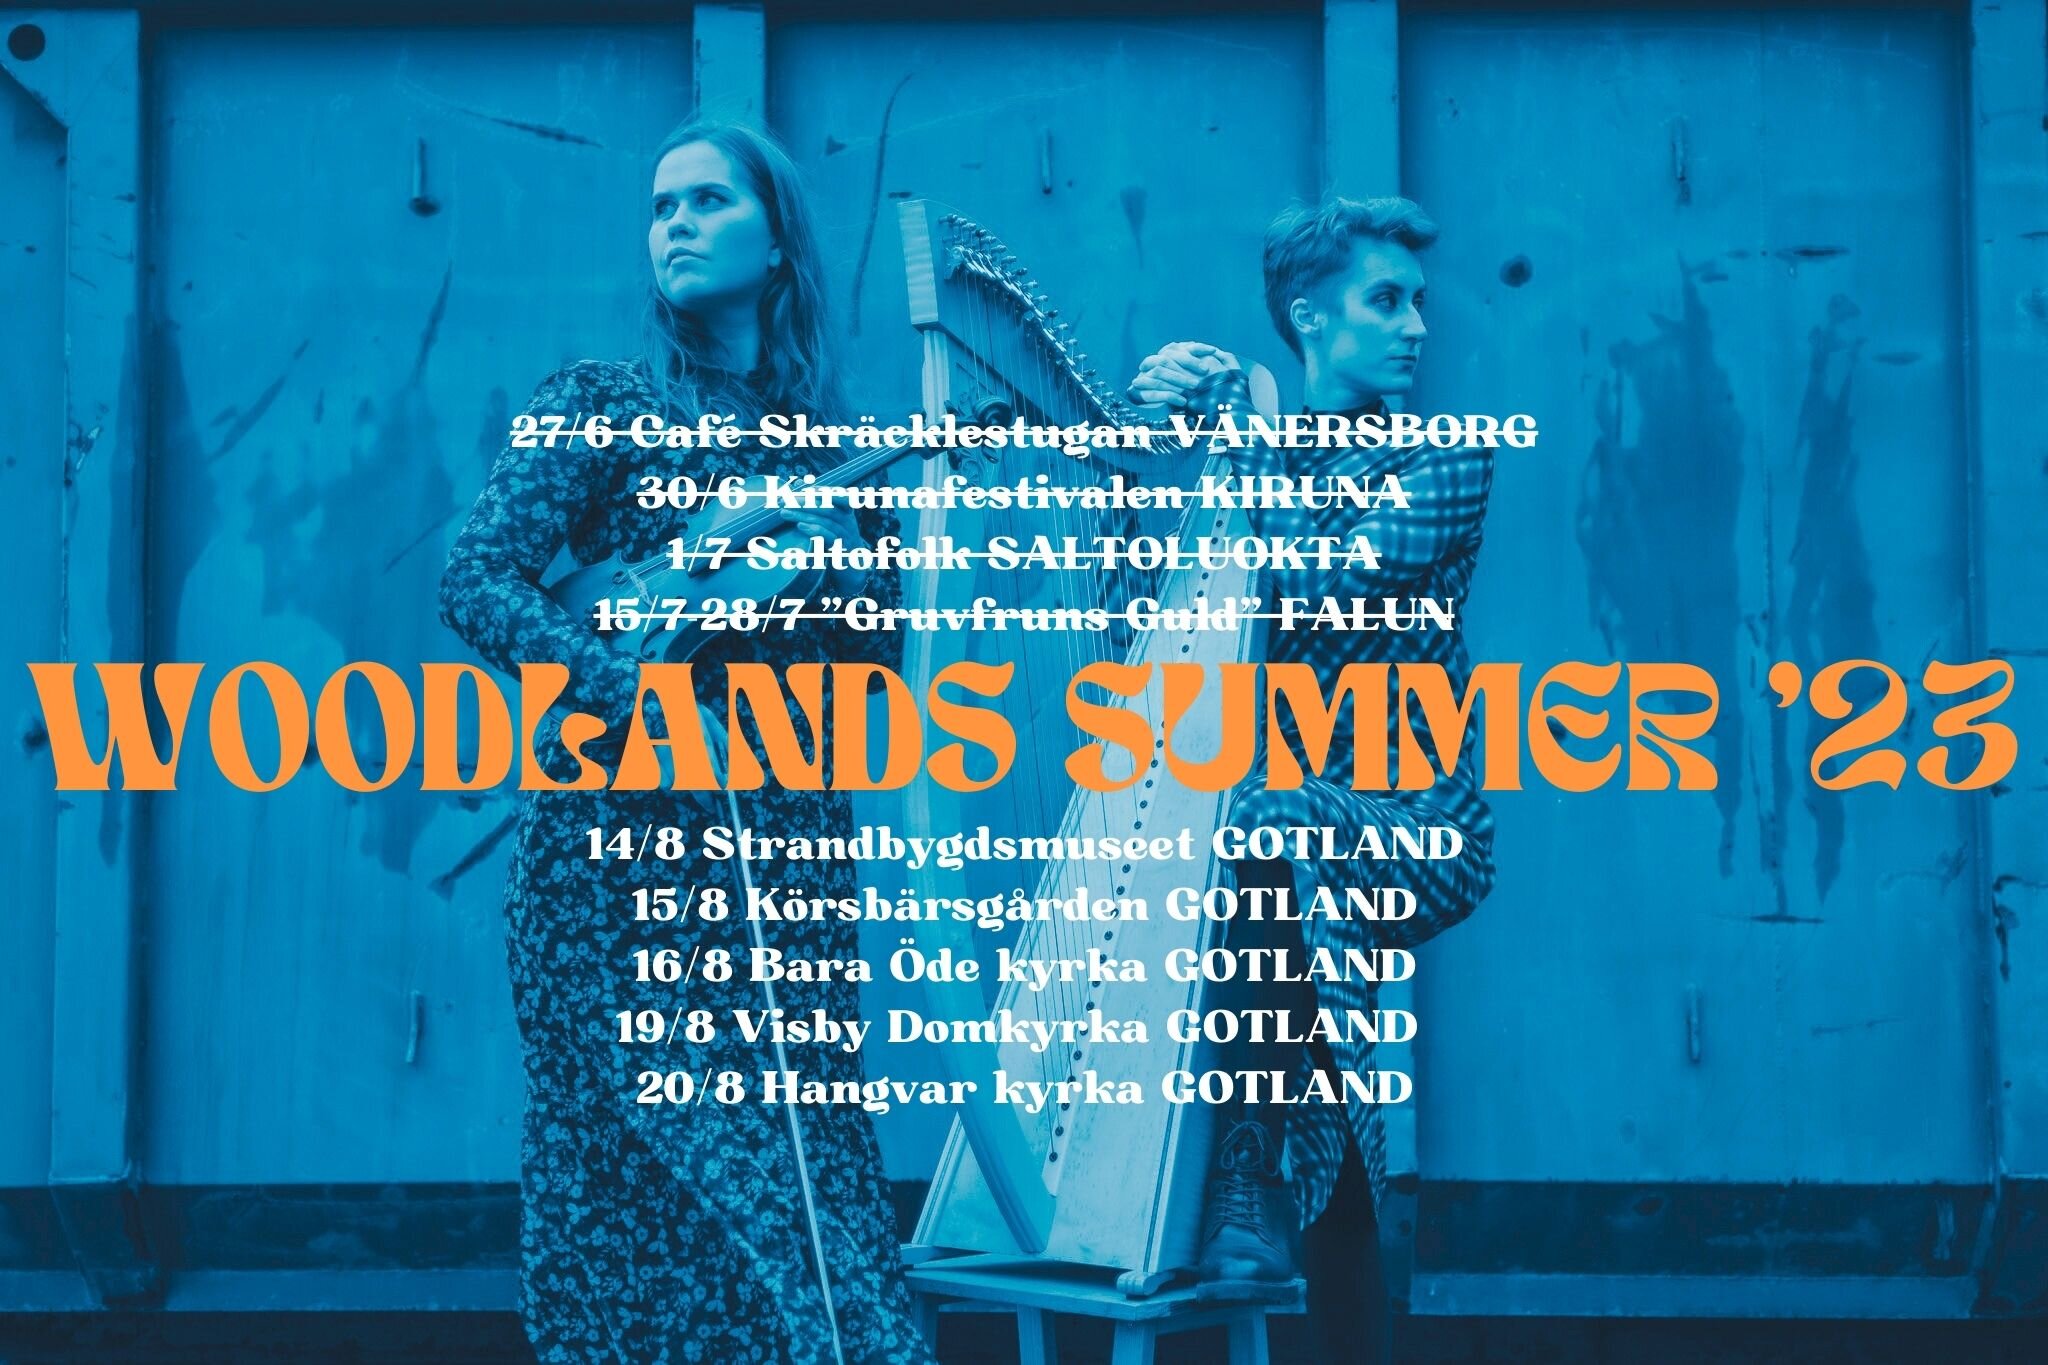 GOTLAND TOUR HERE WE COME 🥳

We're starting off the week with a concert tonight at Strandbygdsmuseet, Ljugarn 😍

14/8 LJUGARN 19:00 Strandbygdsmuseet
15/8 BURGSVIK 18:00 @korsbarsgarden 
16/8 ROMAKLOSTER 20:00 Bara &Ouml;dekyrka
19/8 VISBY 11:00 @v